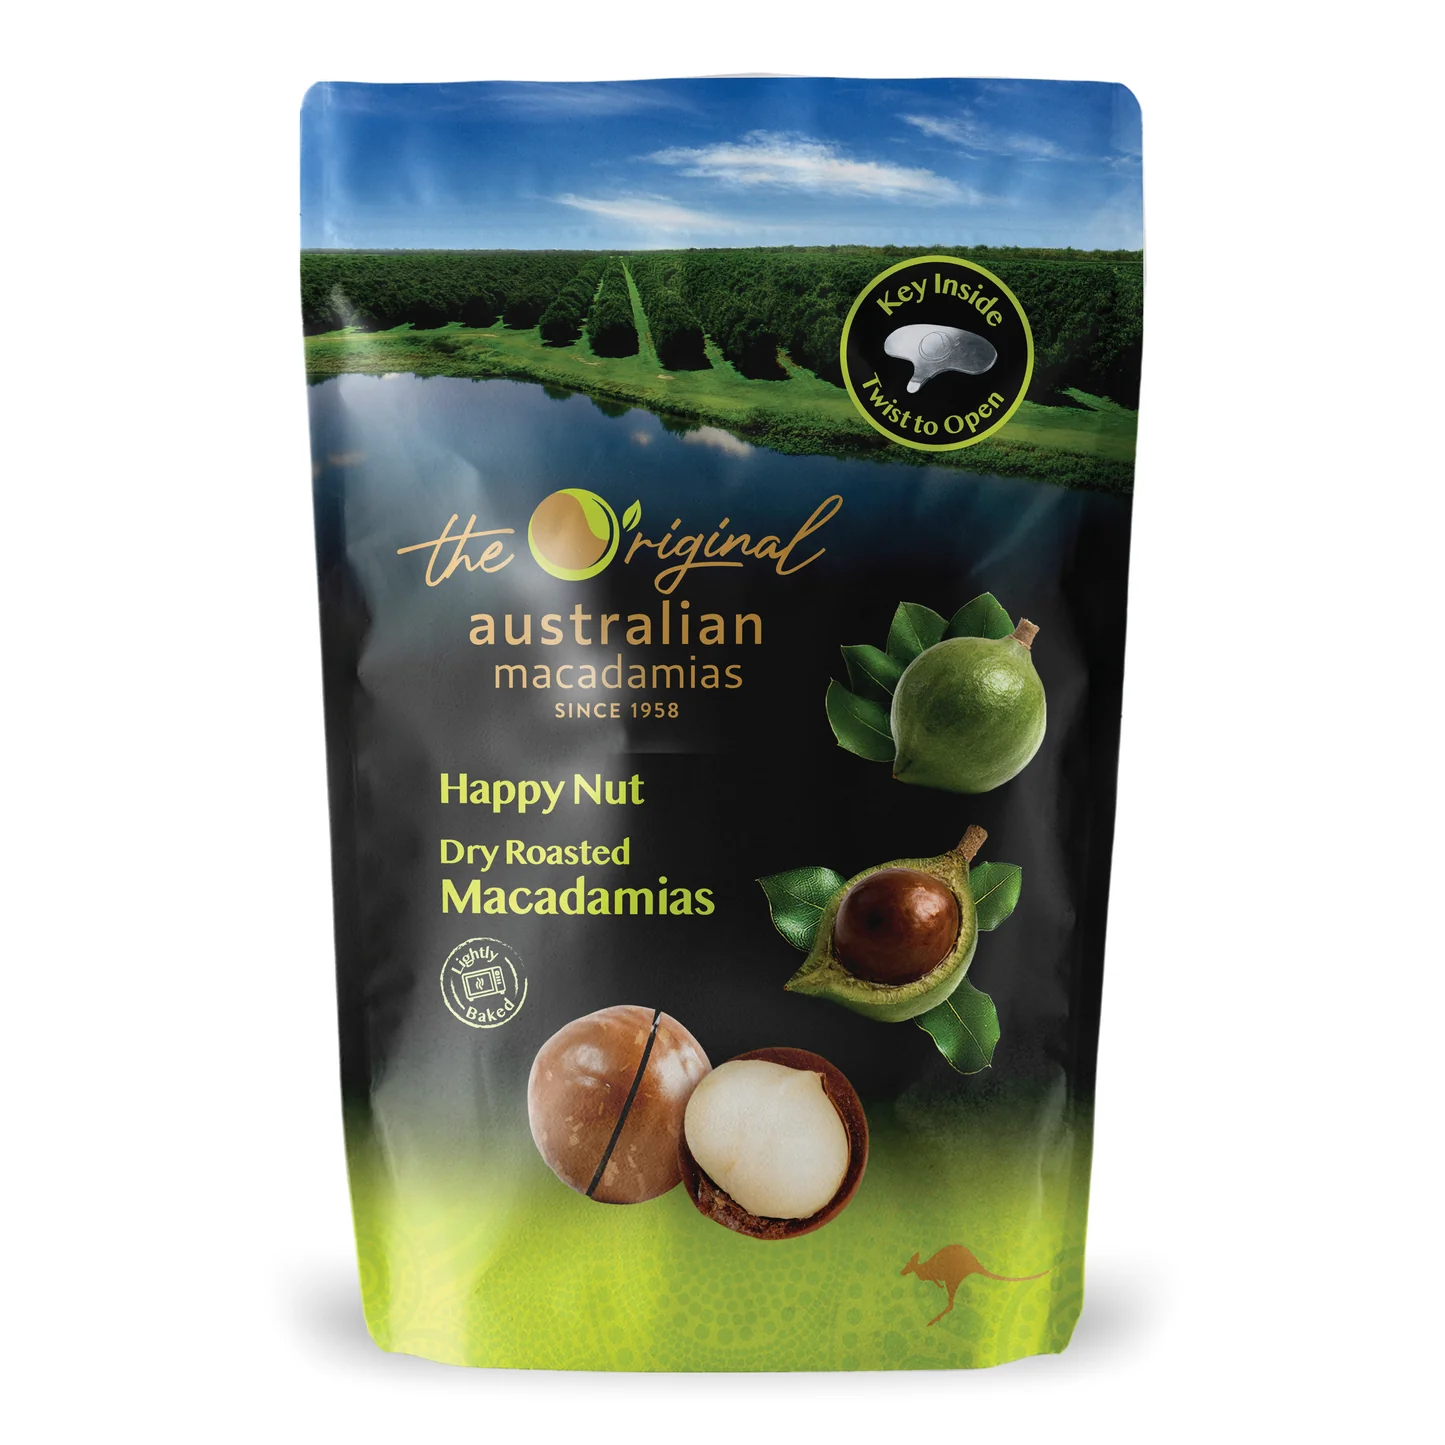 Happy Nut Dry Roasted Macadamias 225g-eBest-Weekly Special,Nuts & Dried Fruit,Snacks & Confectionery